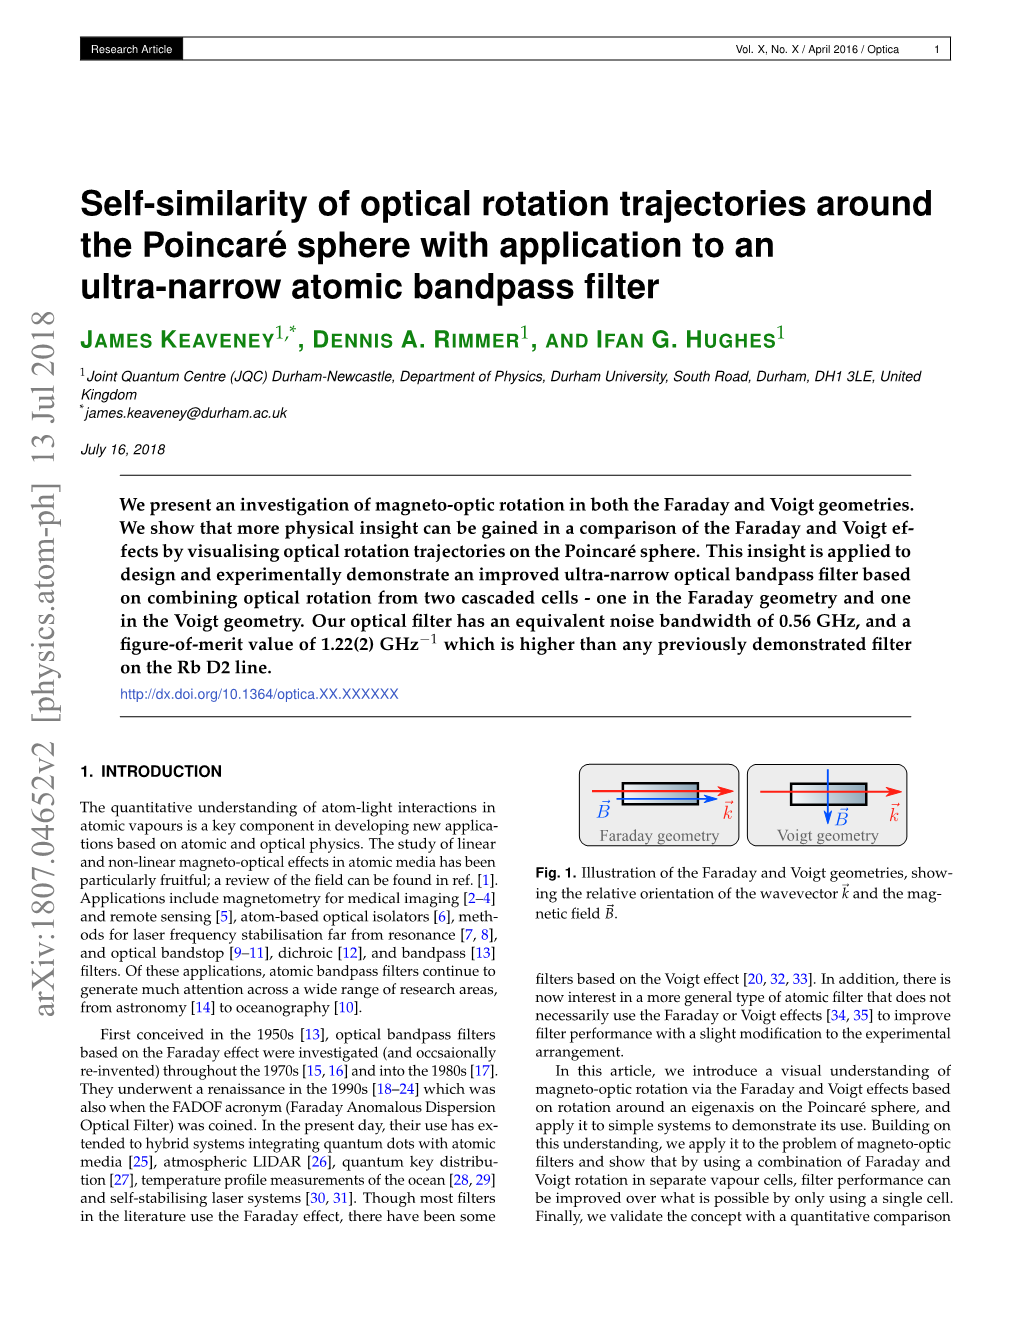 Self-Similarity of Optical Rotation Trajectories Around the Poincaré Sphere with Application to an Ultra-Narrow Atomic Bandpass ﬁlter